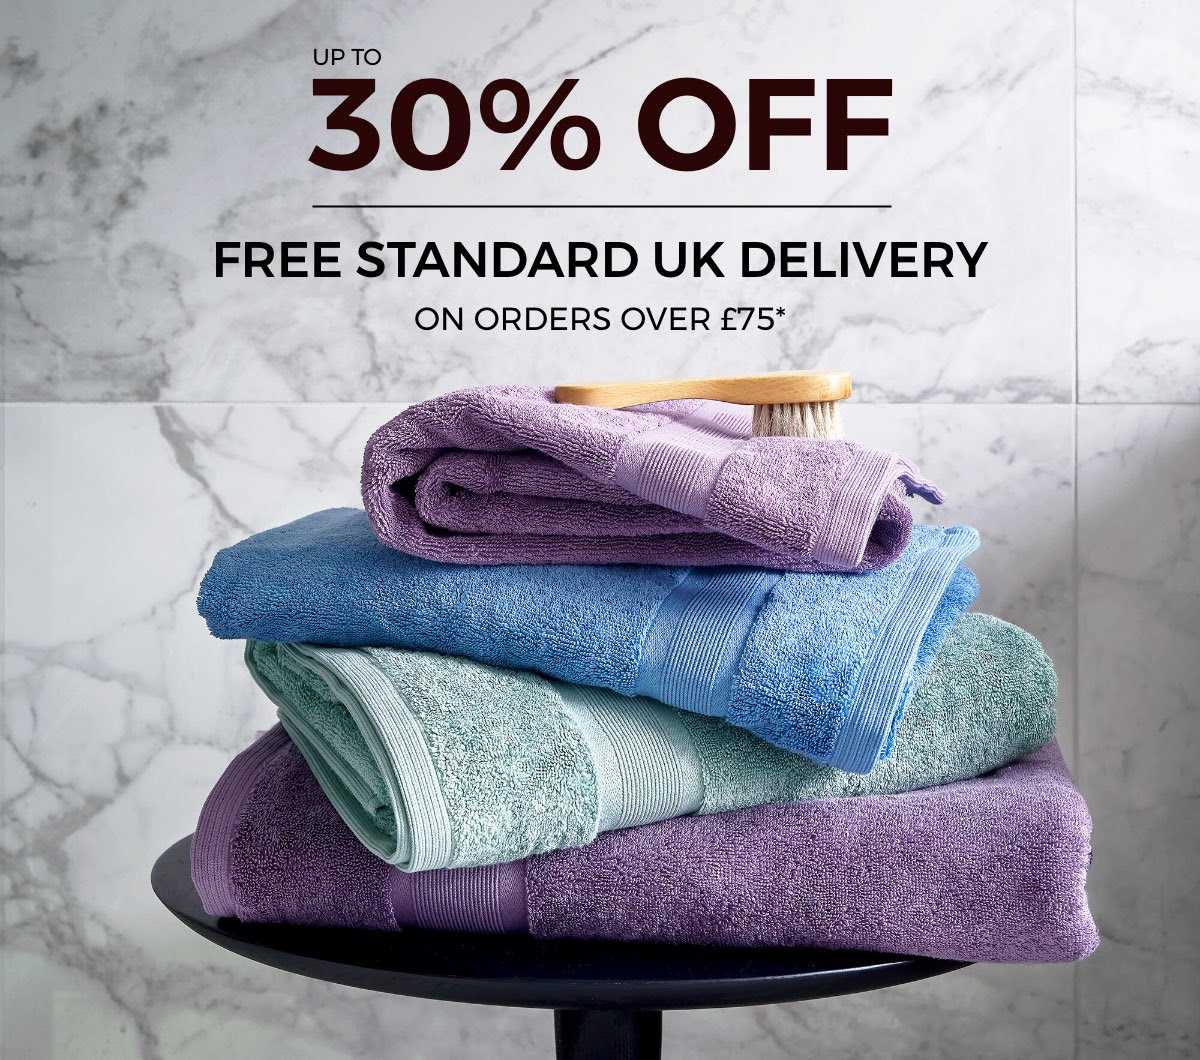 House of Fraser - Up to 30% off selected homeware